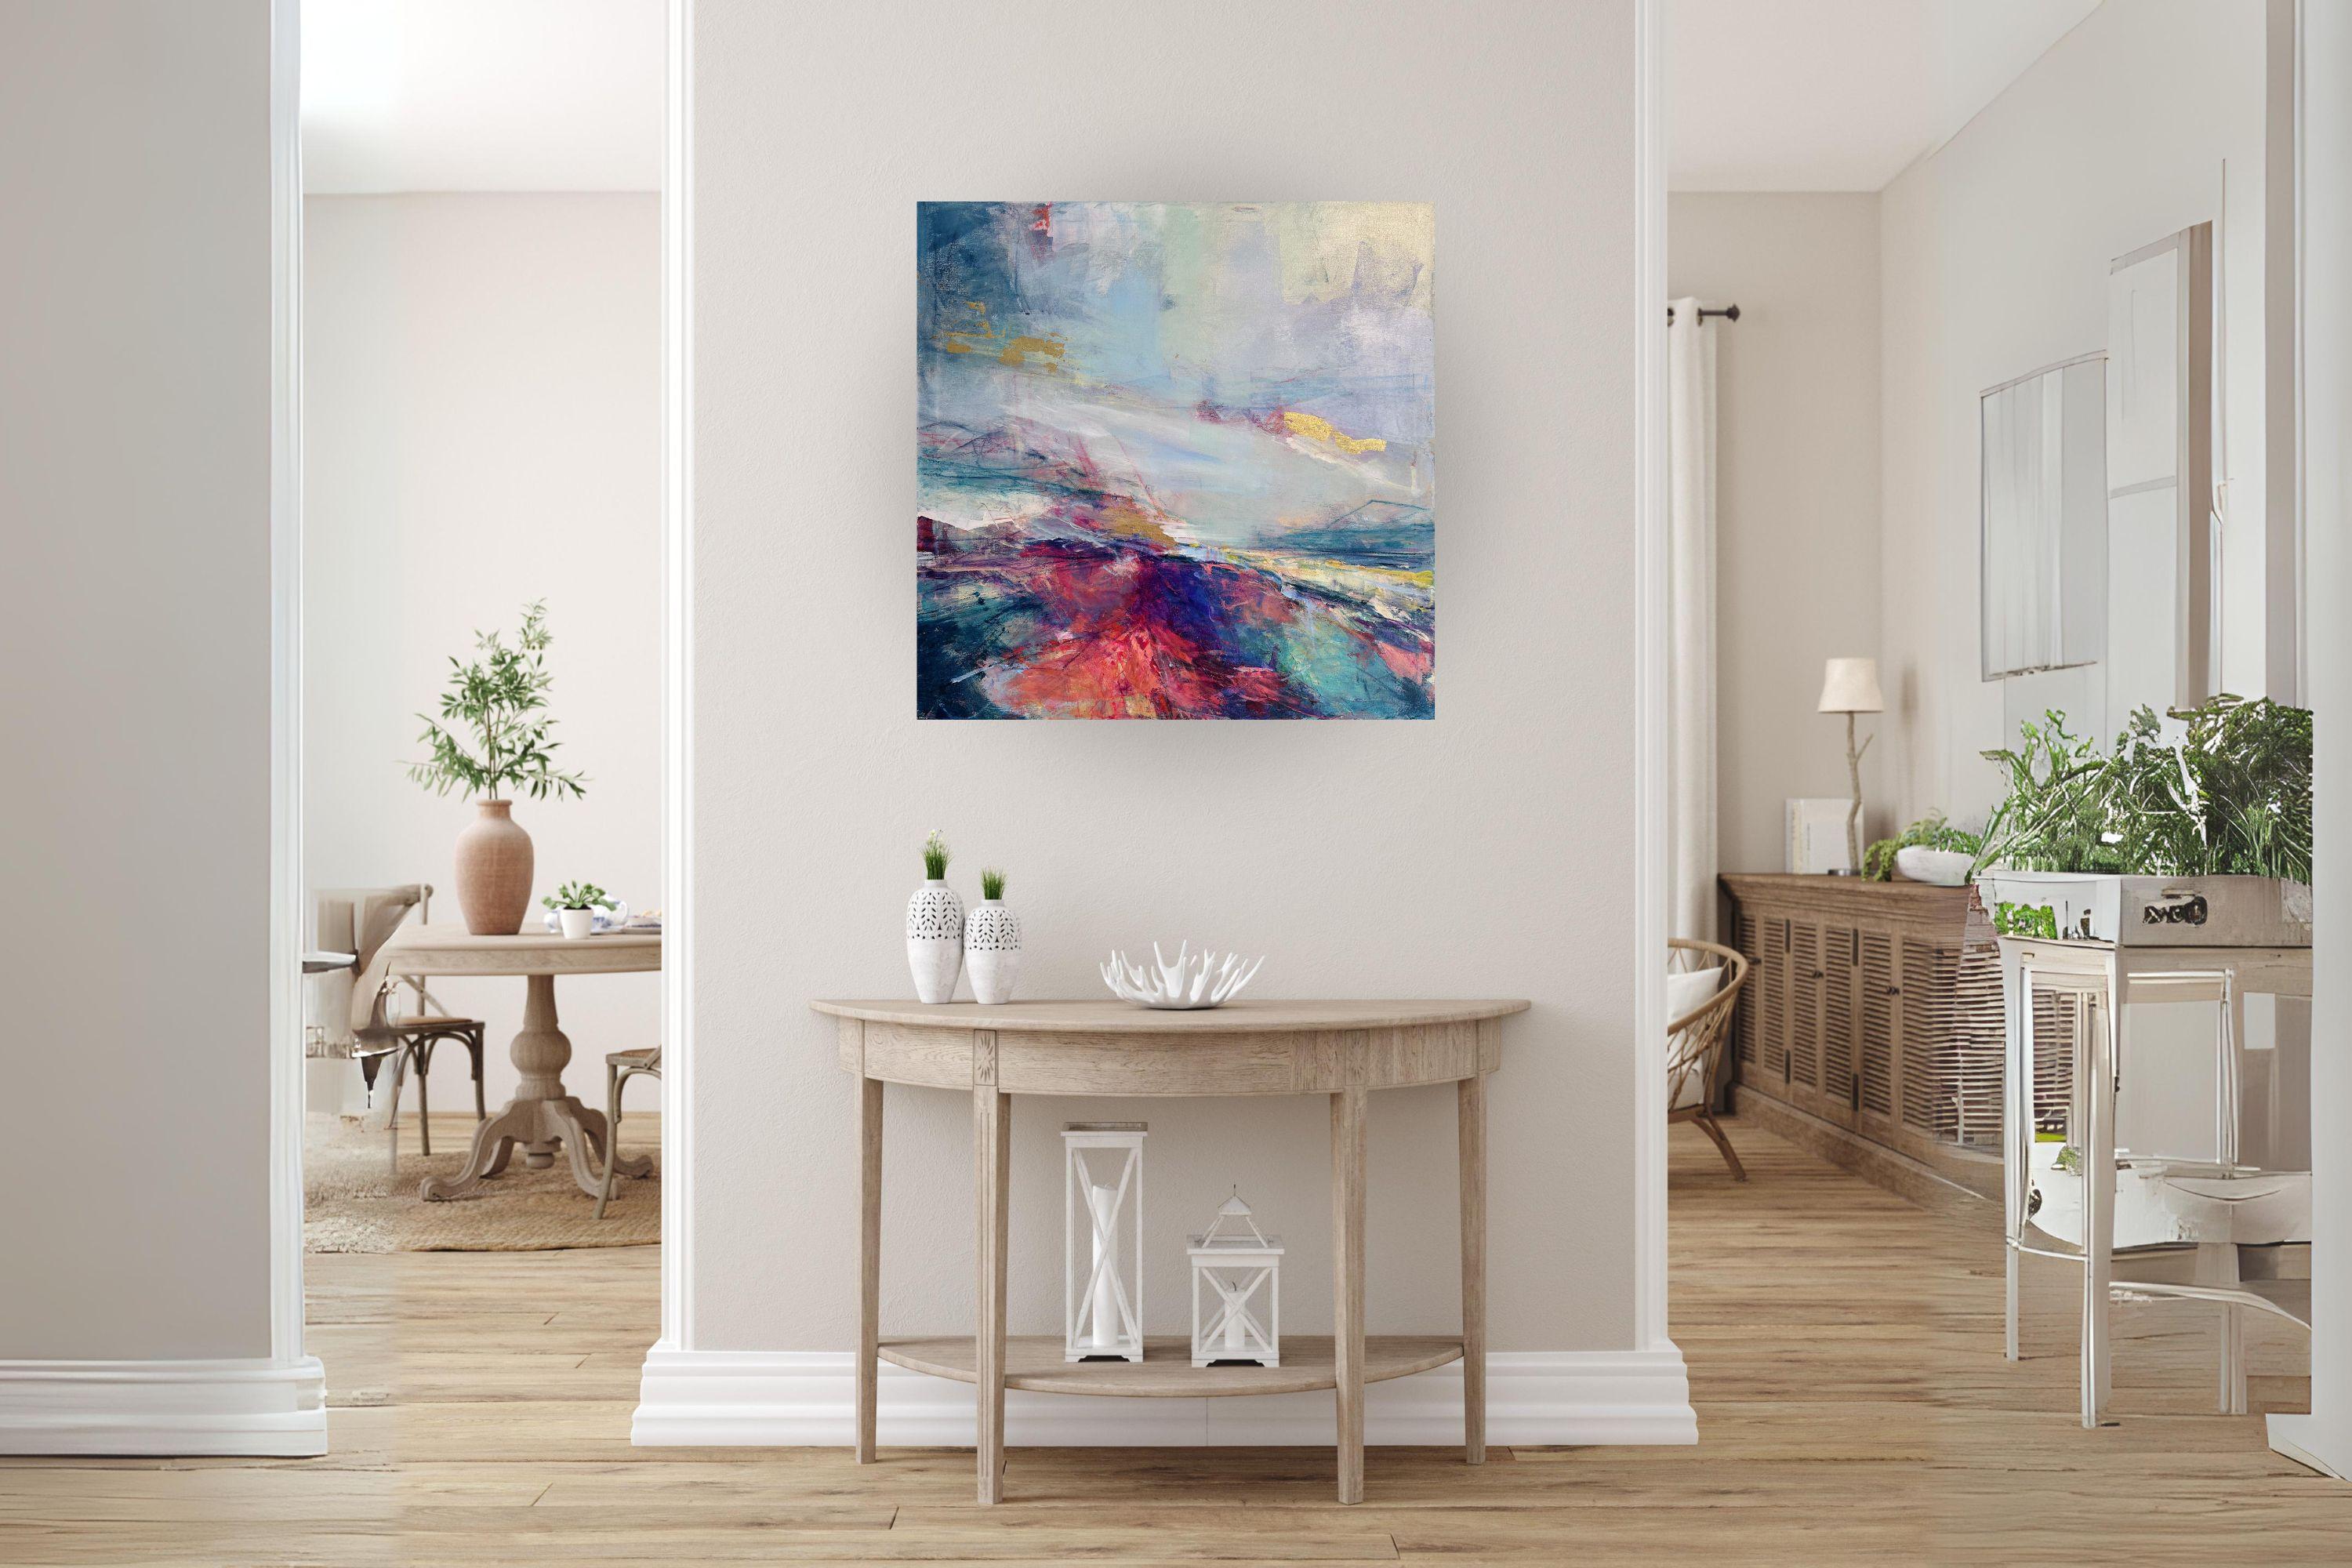 Dreams of a Thousand Islands 2-original Abstract landscape painting- modern art For Sale 1